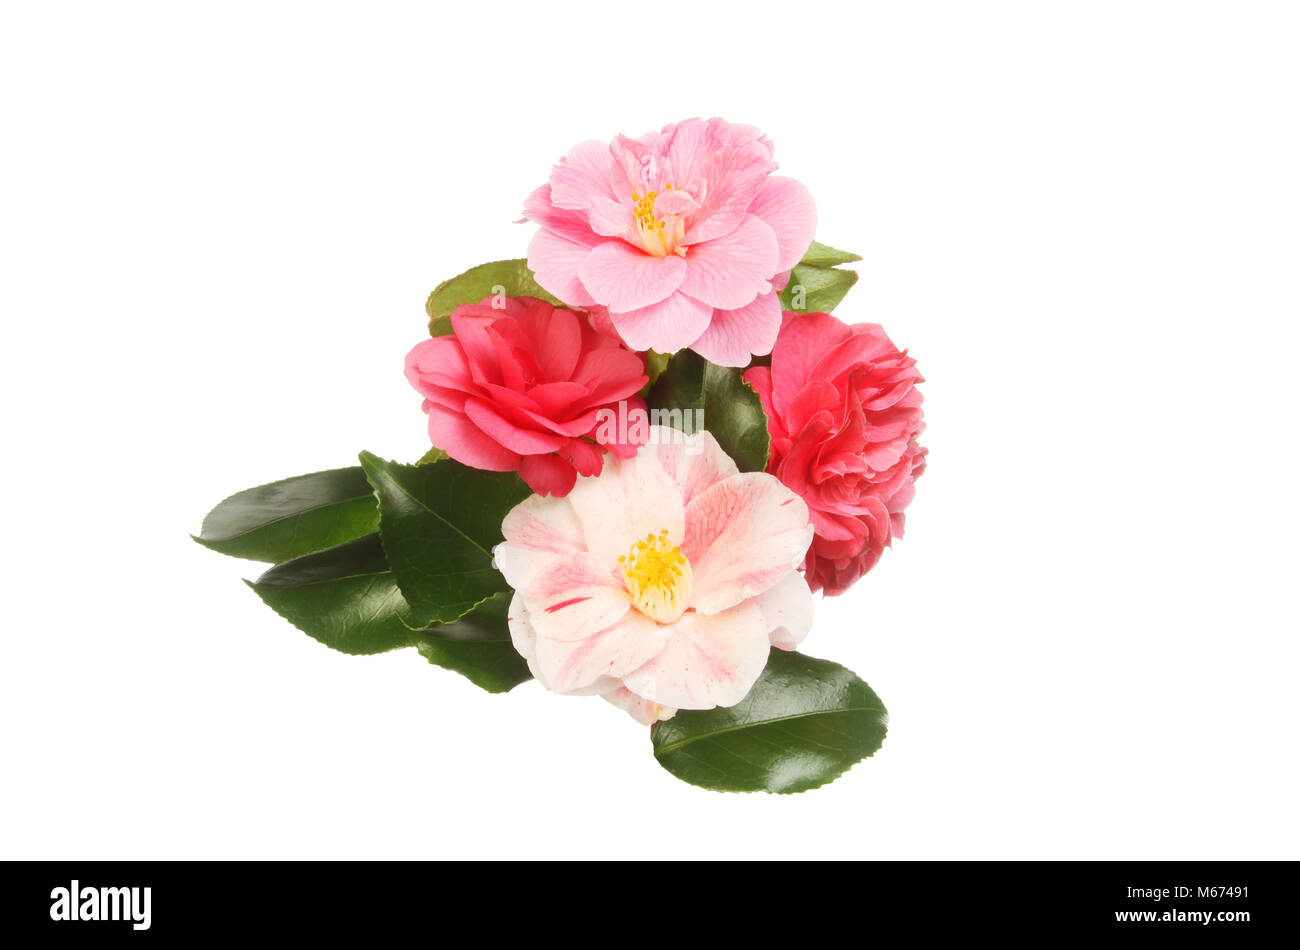 Arrangement of diffeent camellia flowers and foliage isolated against white Stock Photo